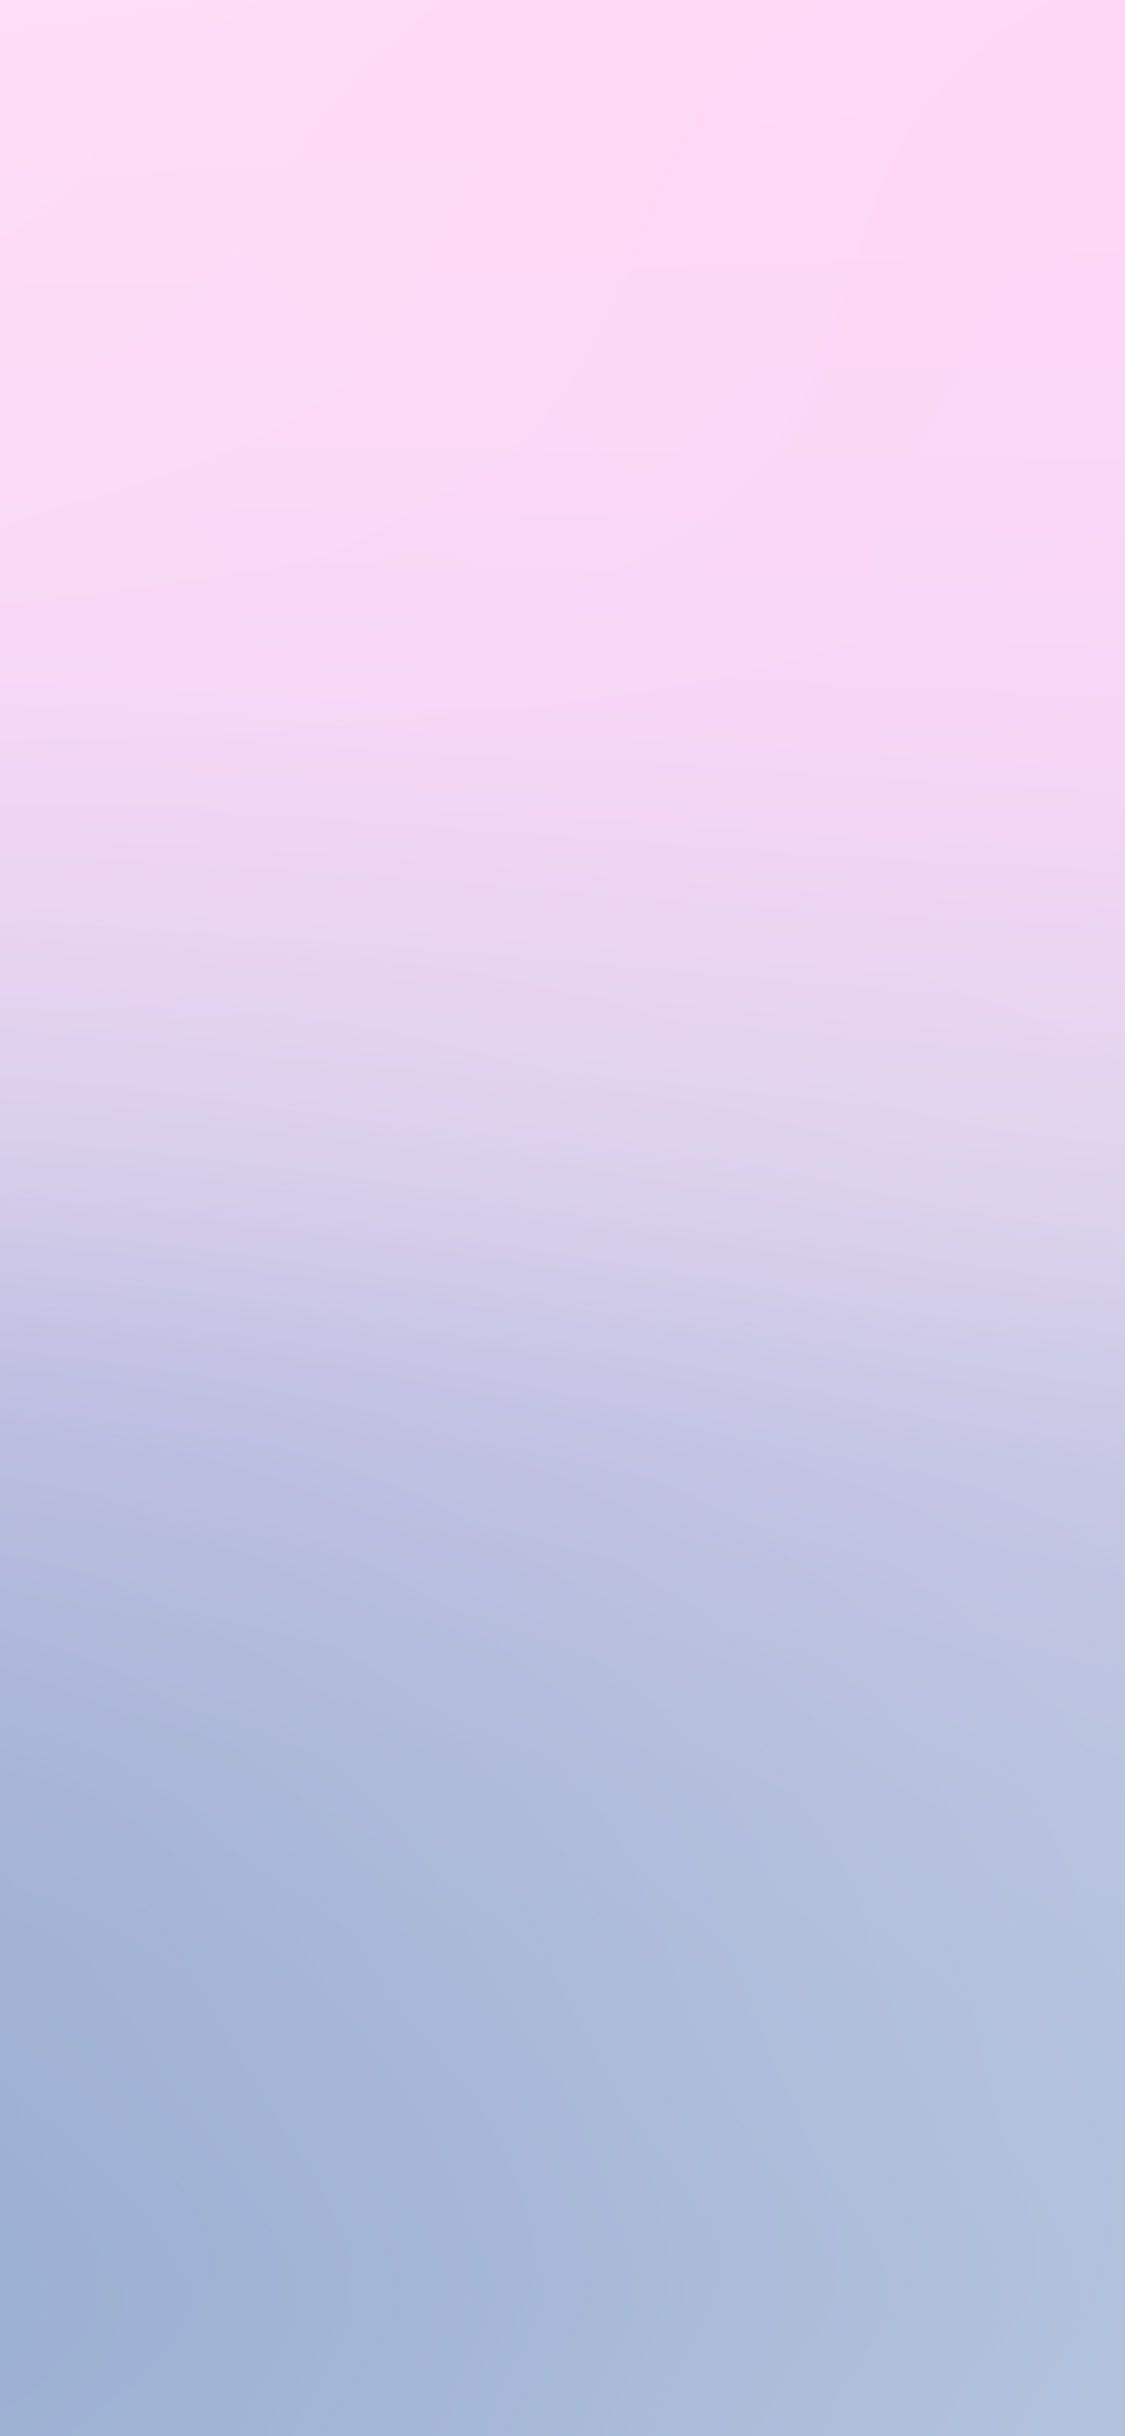 Blue and Pink Wallpapers on WallpaperDog